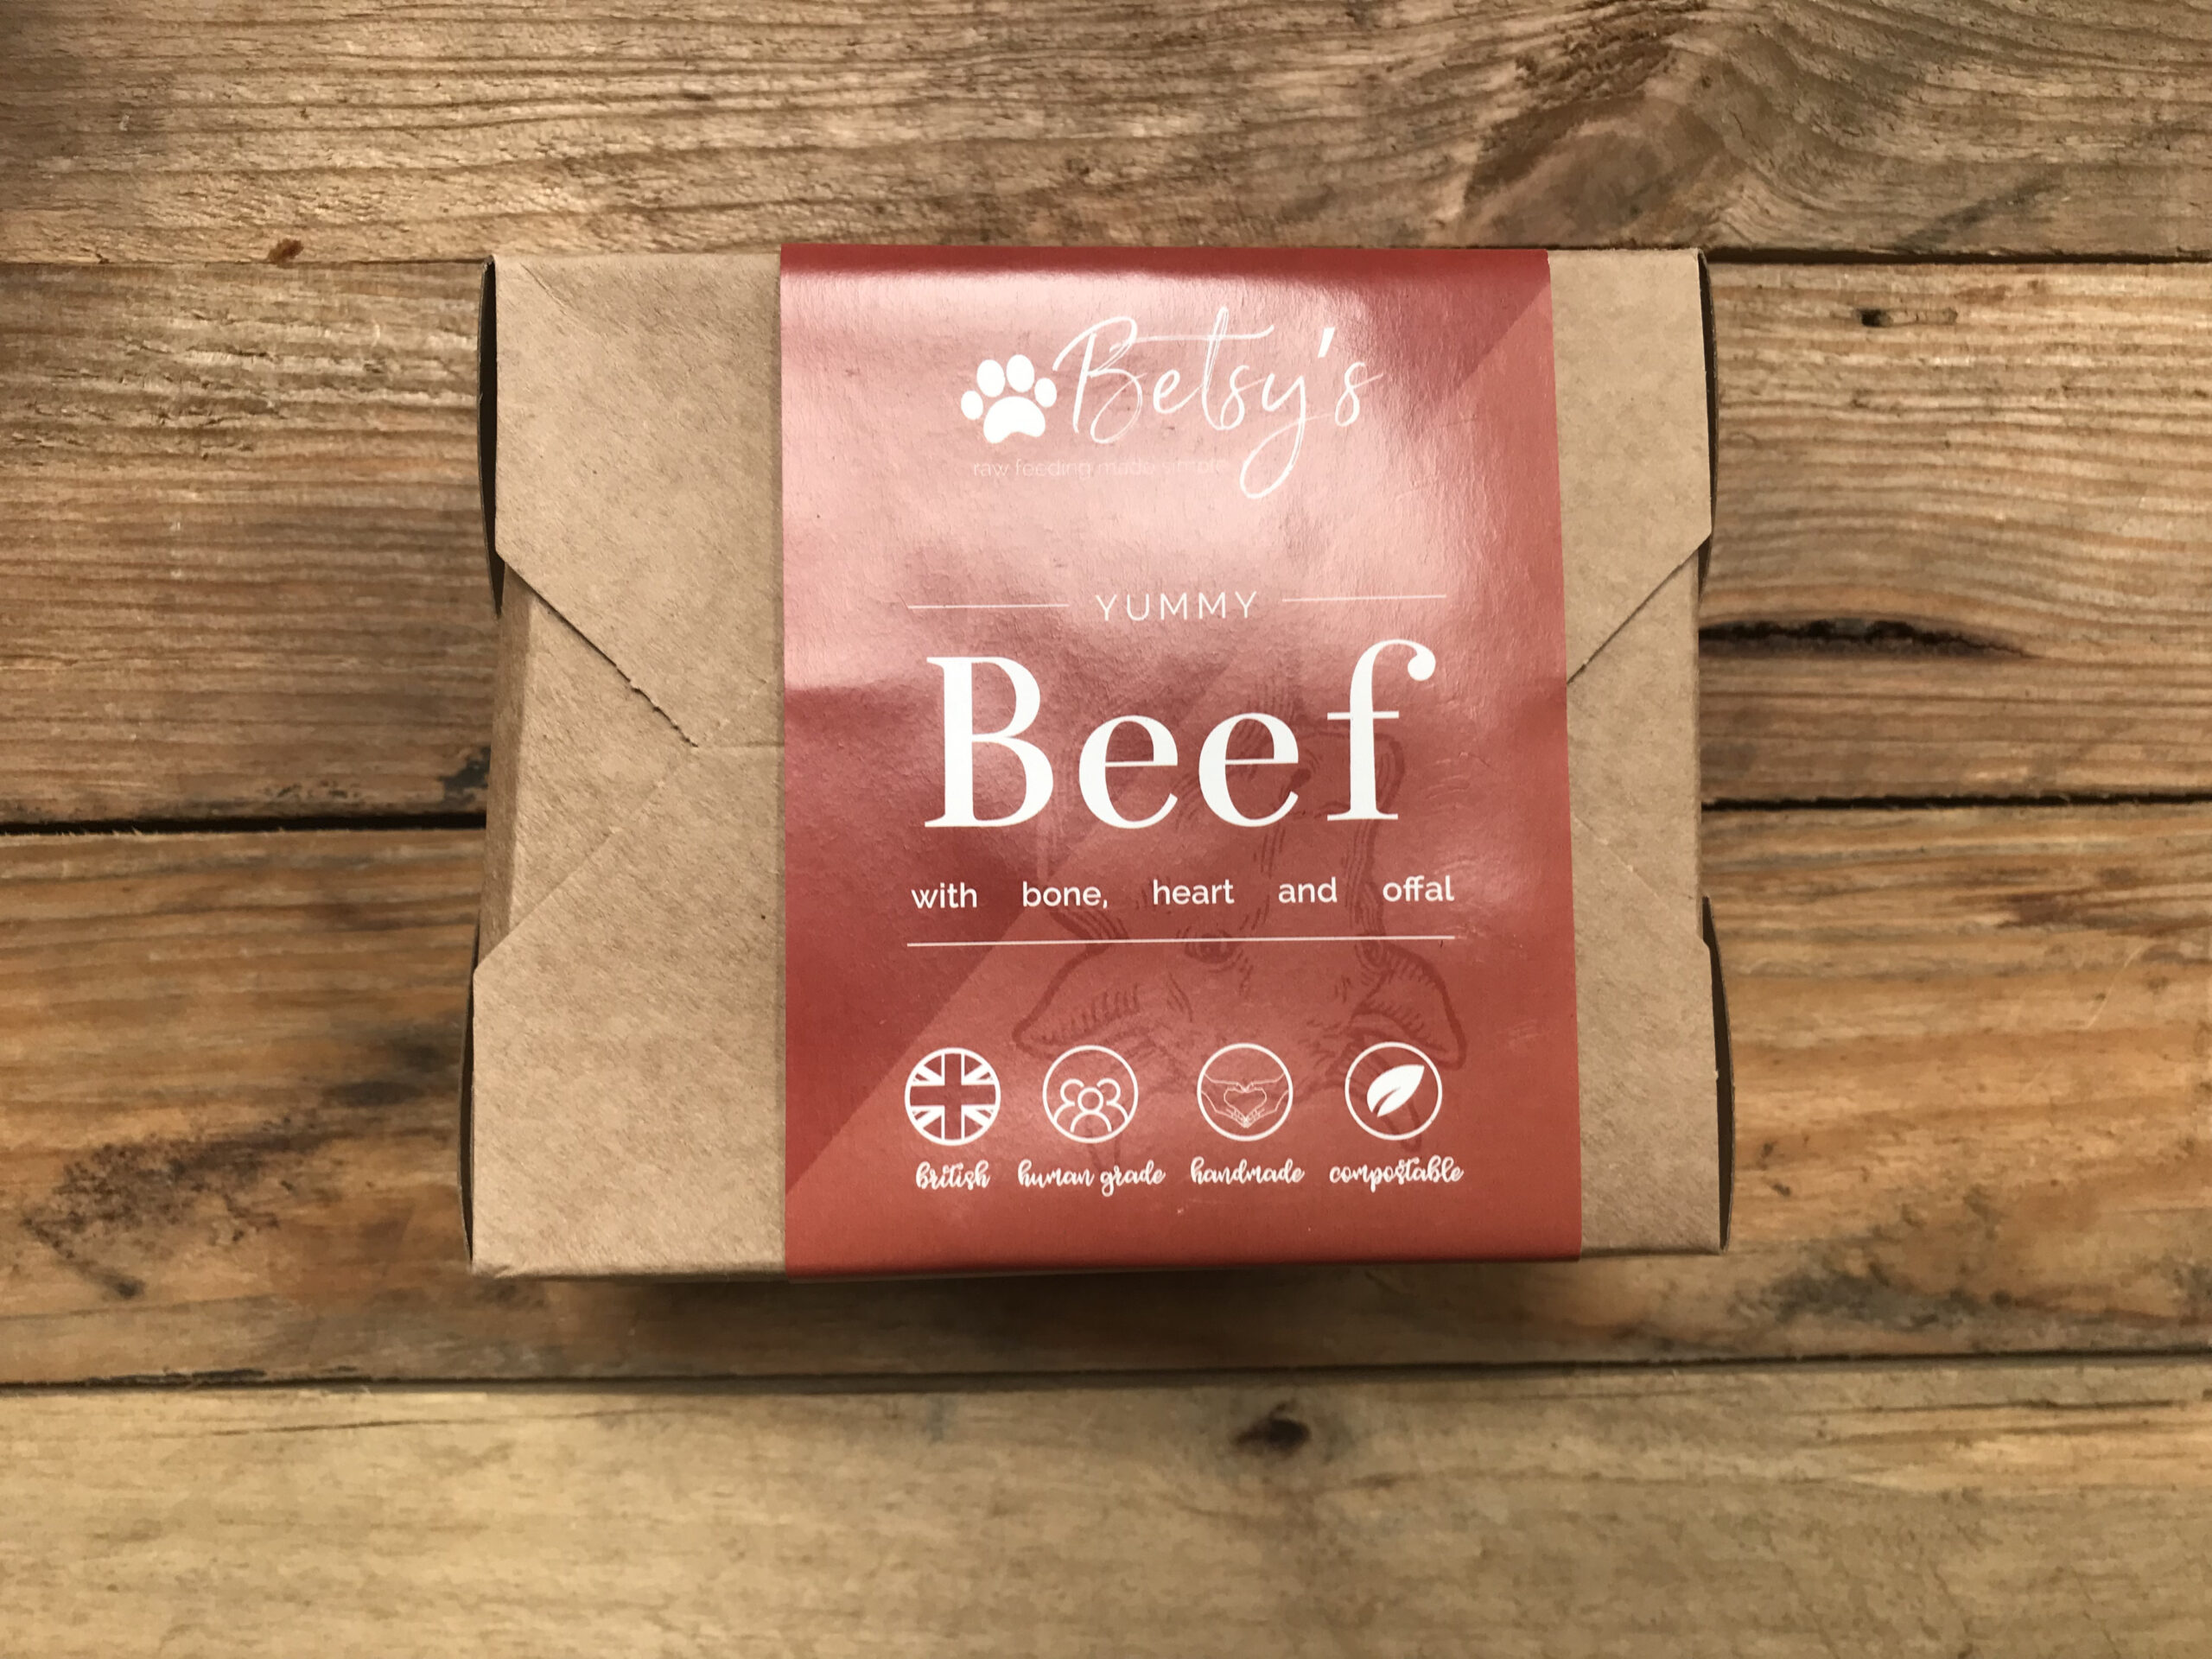 Betsy’s Yummy Beef – 500g